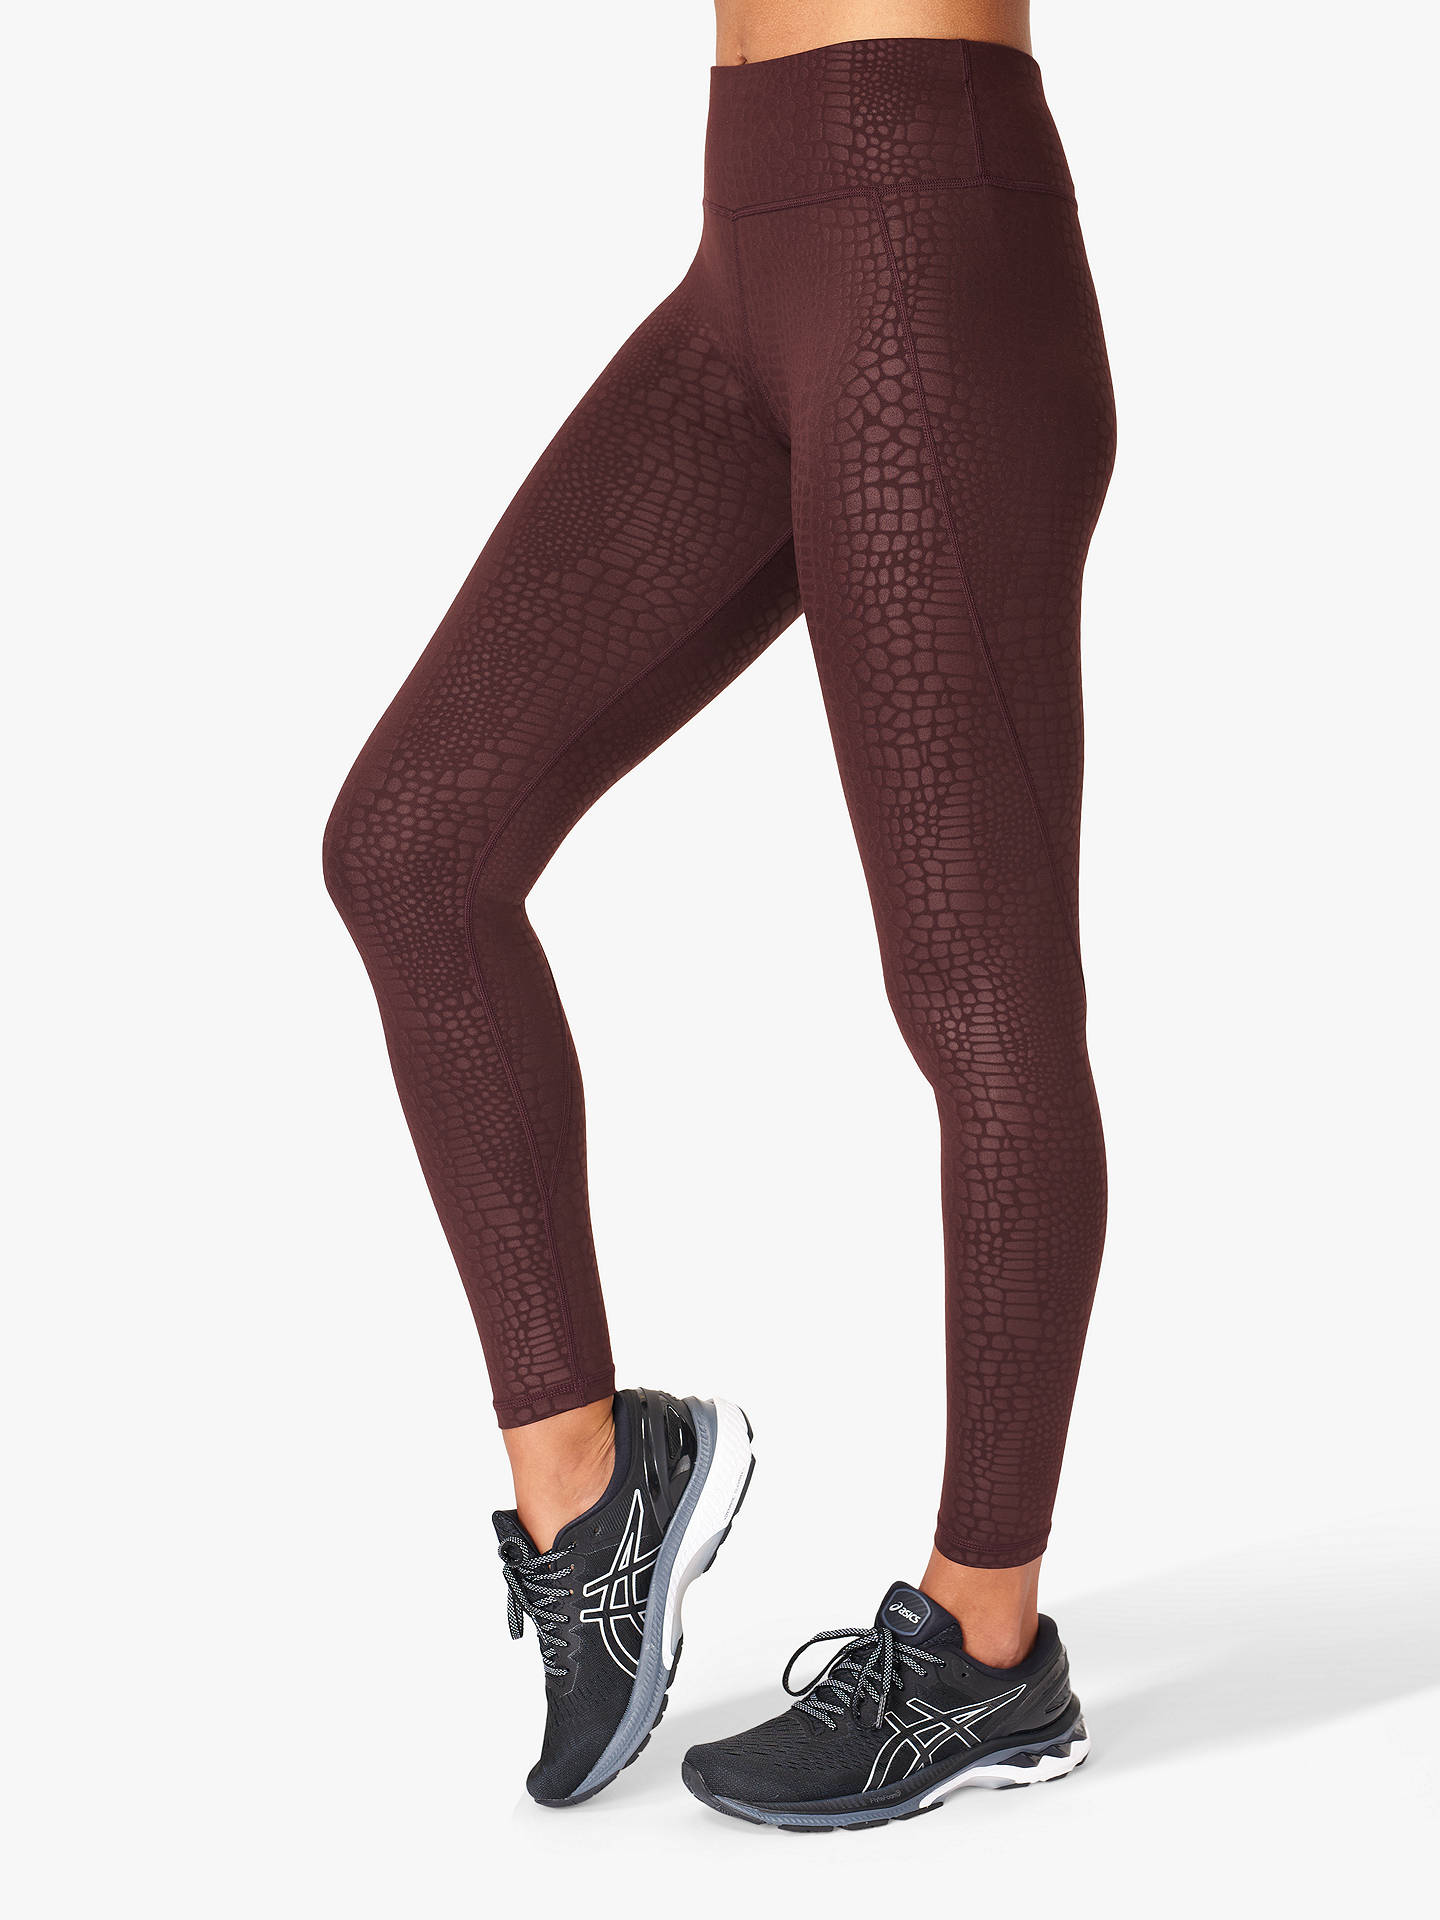 A Review of Sweaty Betty All Day Gym Leggings